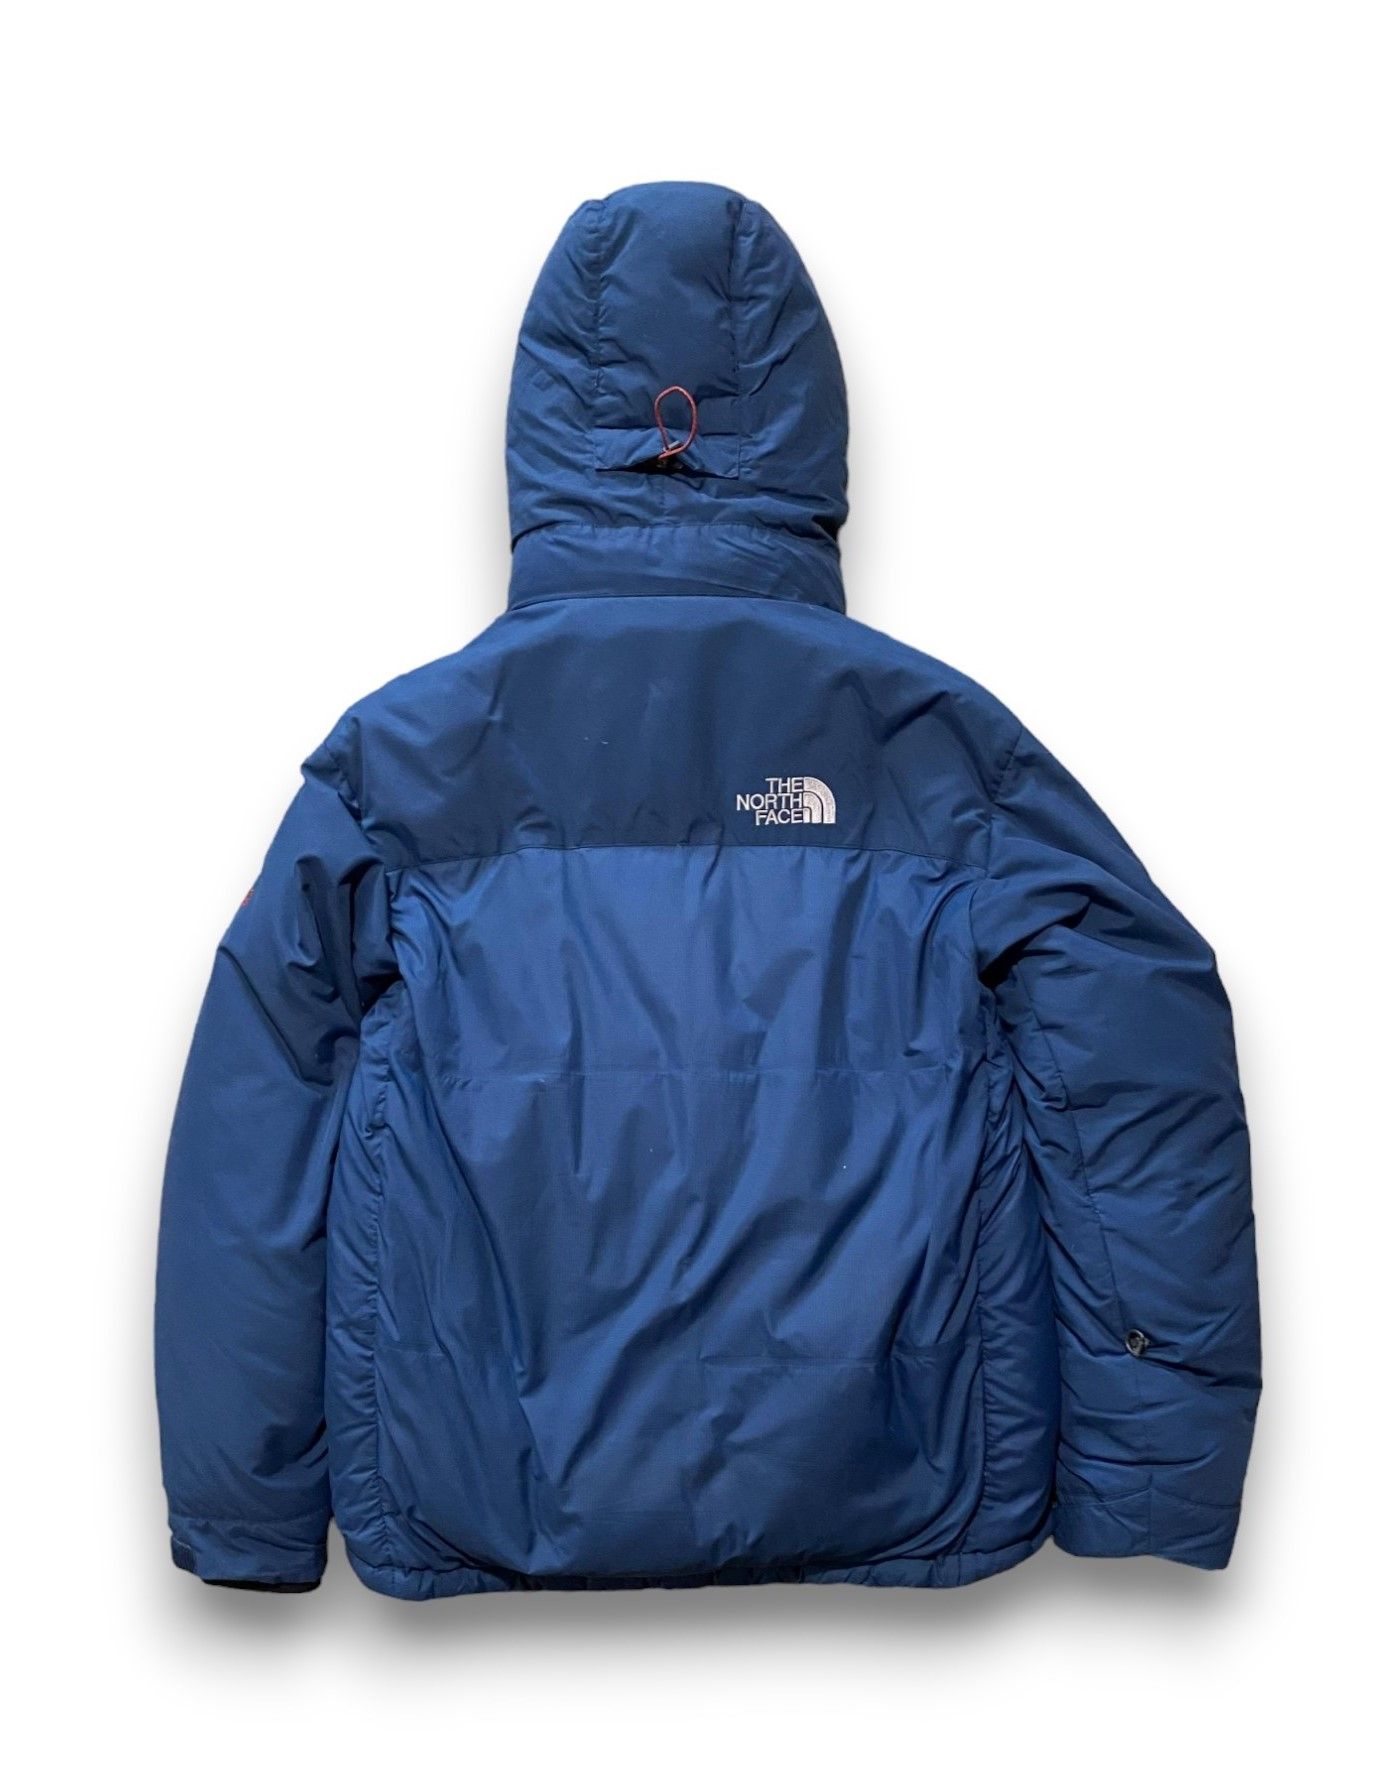 The North Face Puffer Jacket Summit Series 700 Navy - 13